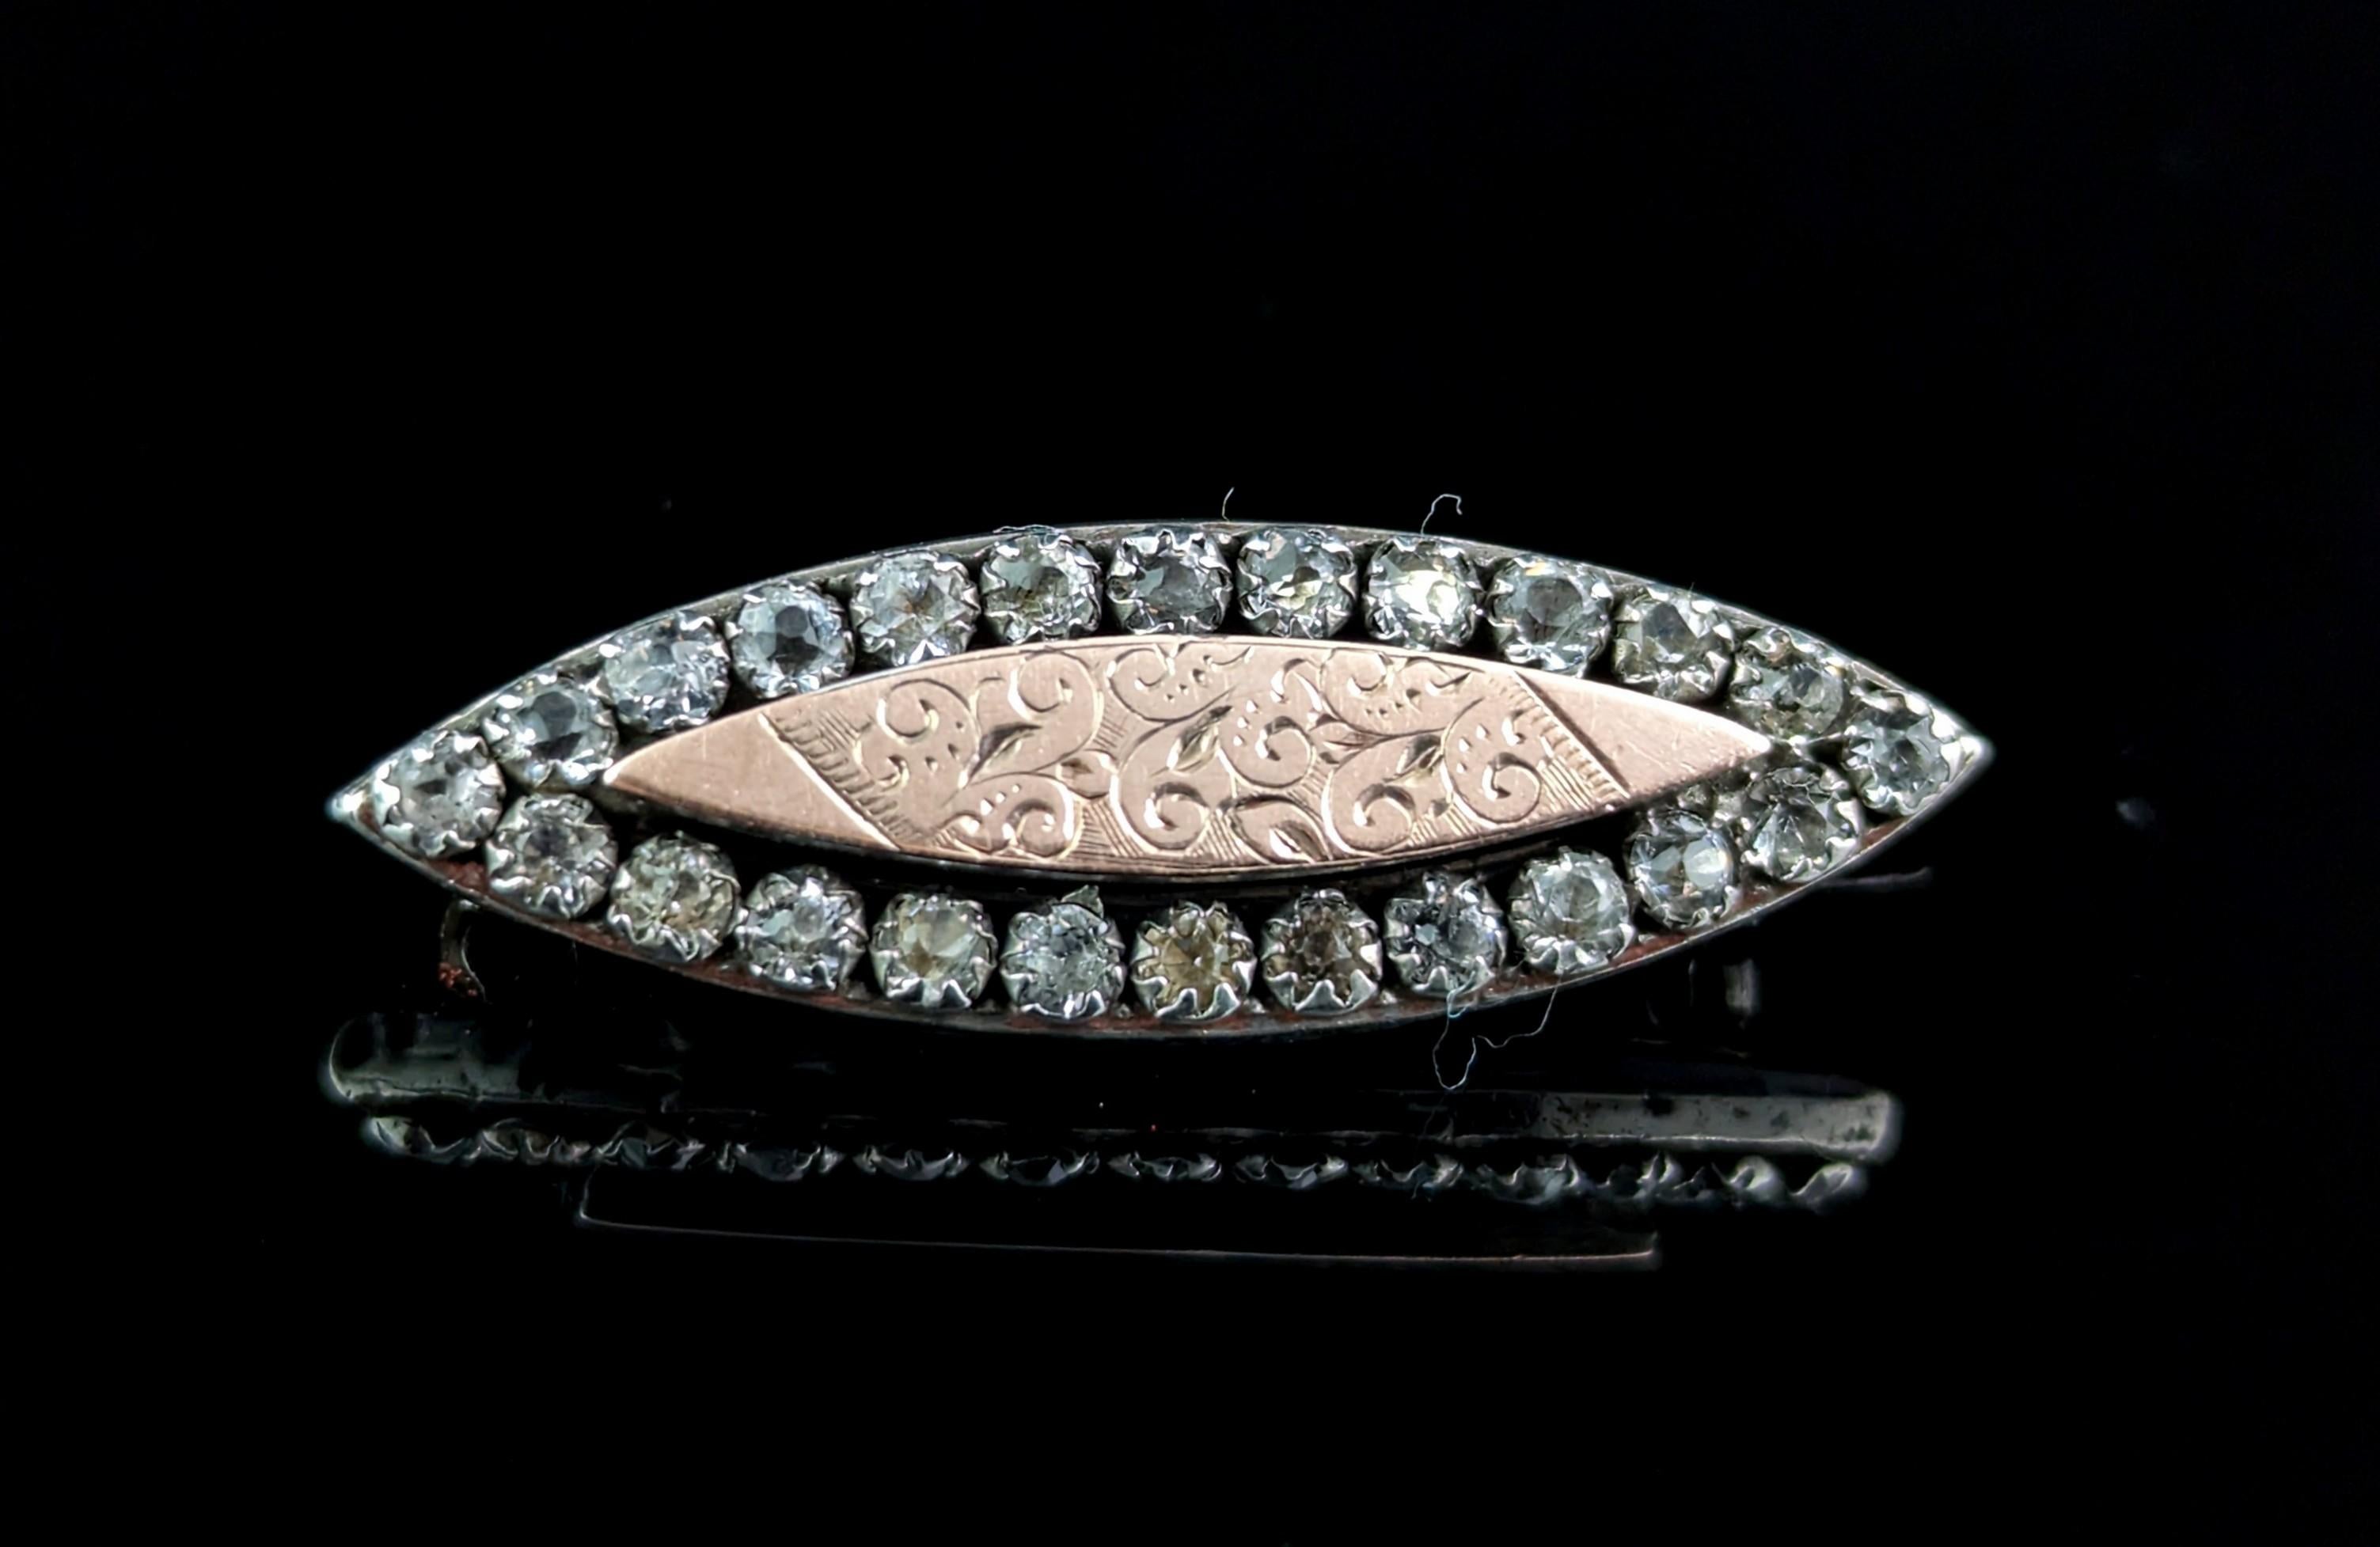 A pretty Victorian silver, paste and Rose gold brooch.

It is an ellipse shaped brooch with a beautiful rim of sparkling paste stones, the centre has an applied rose gold panel engraved with a foliate design.

The brooch has an old C type clasp and